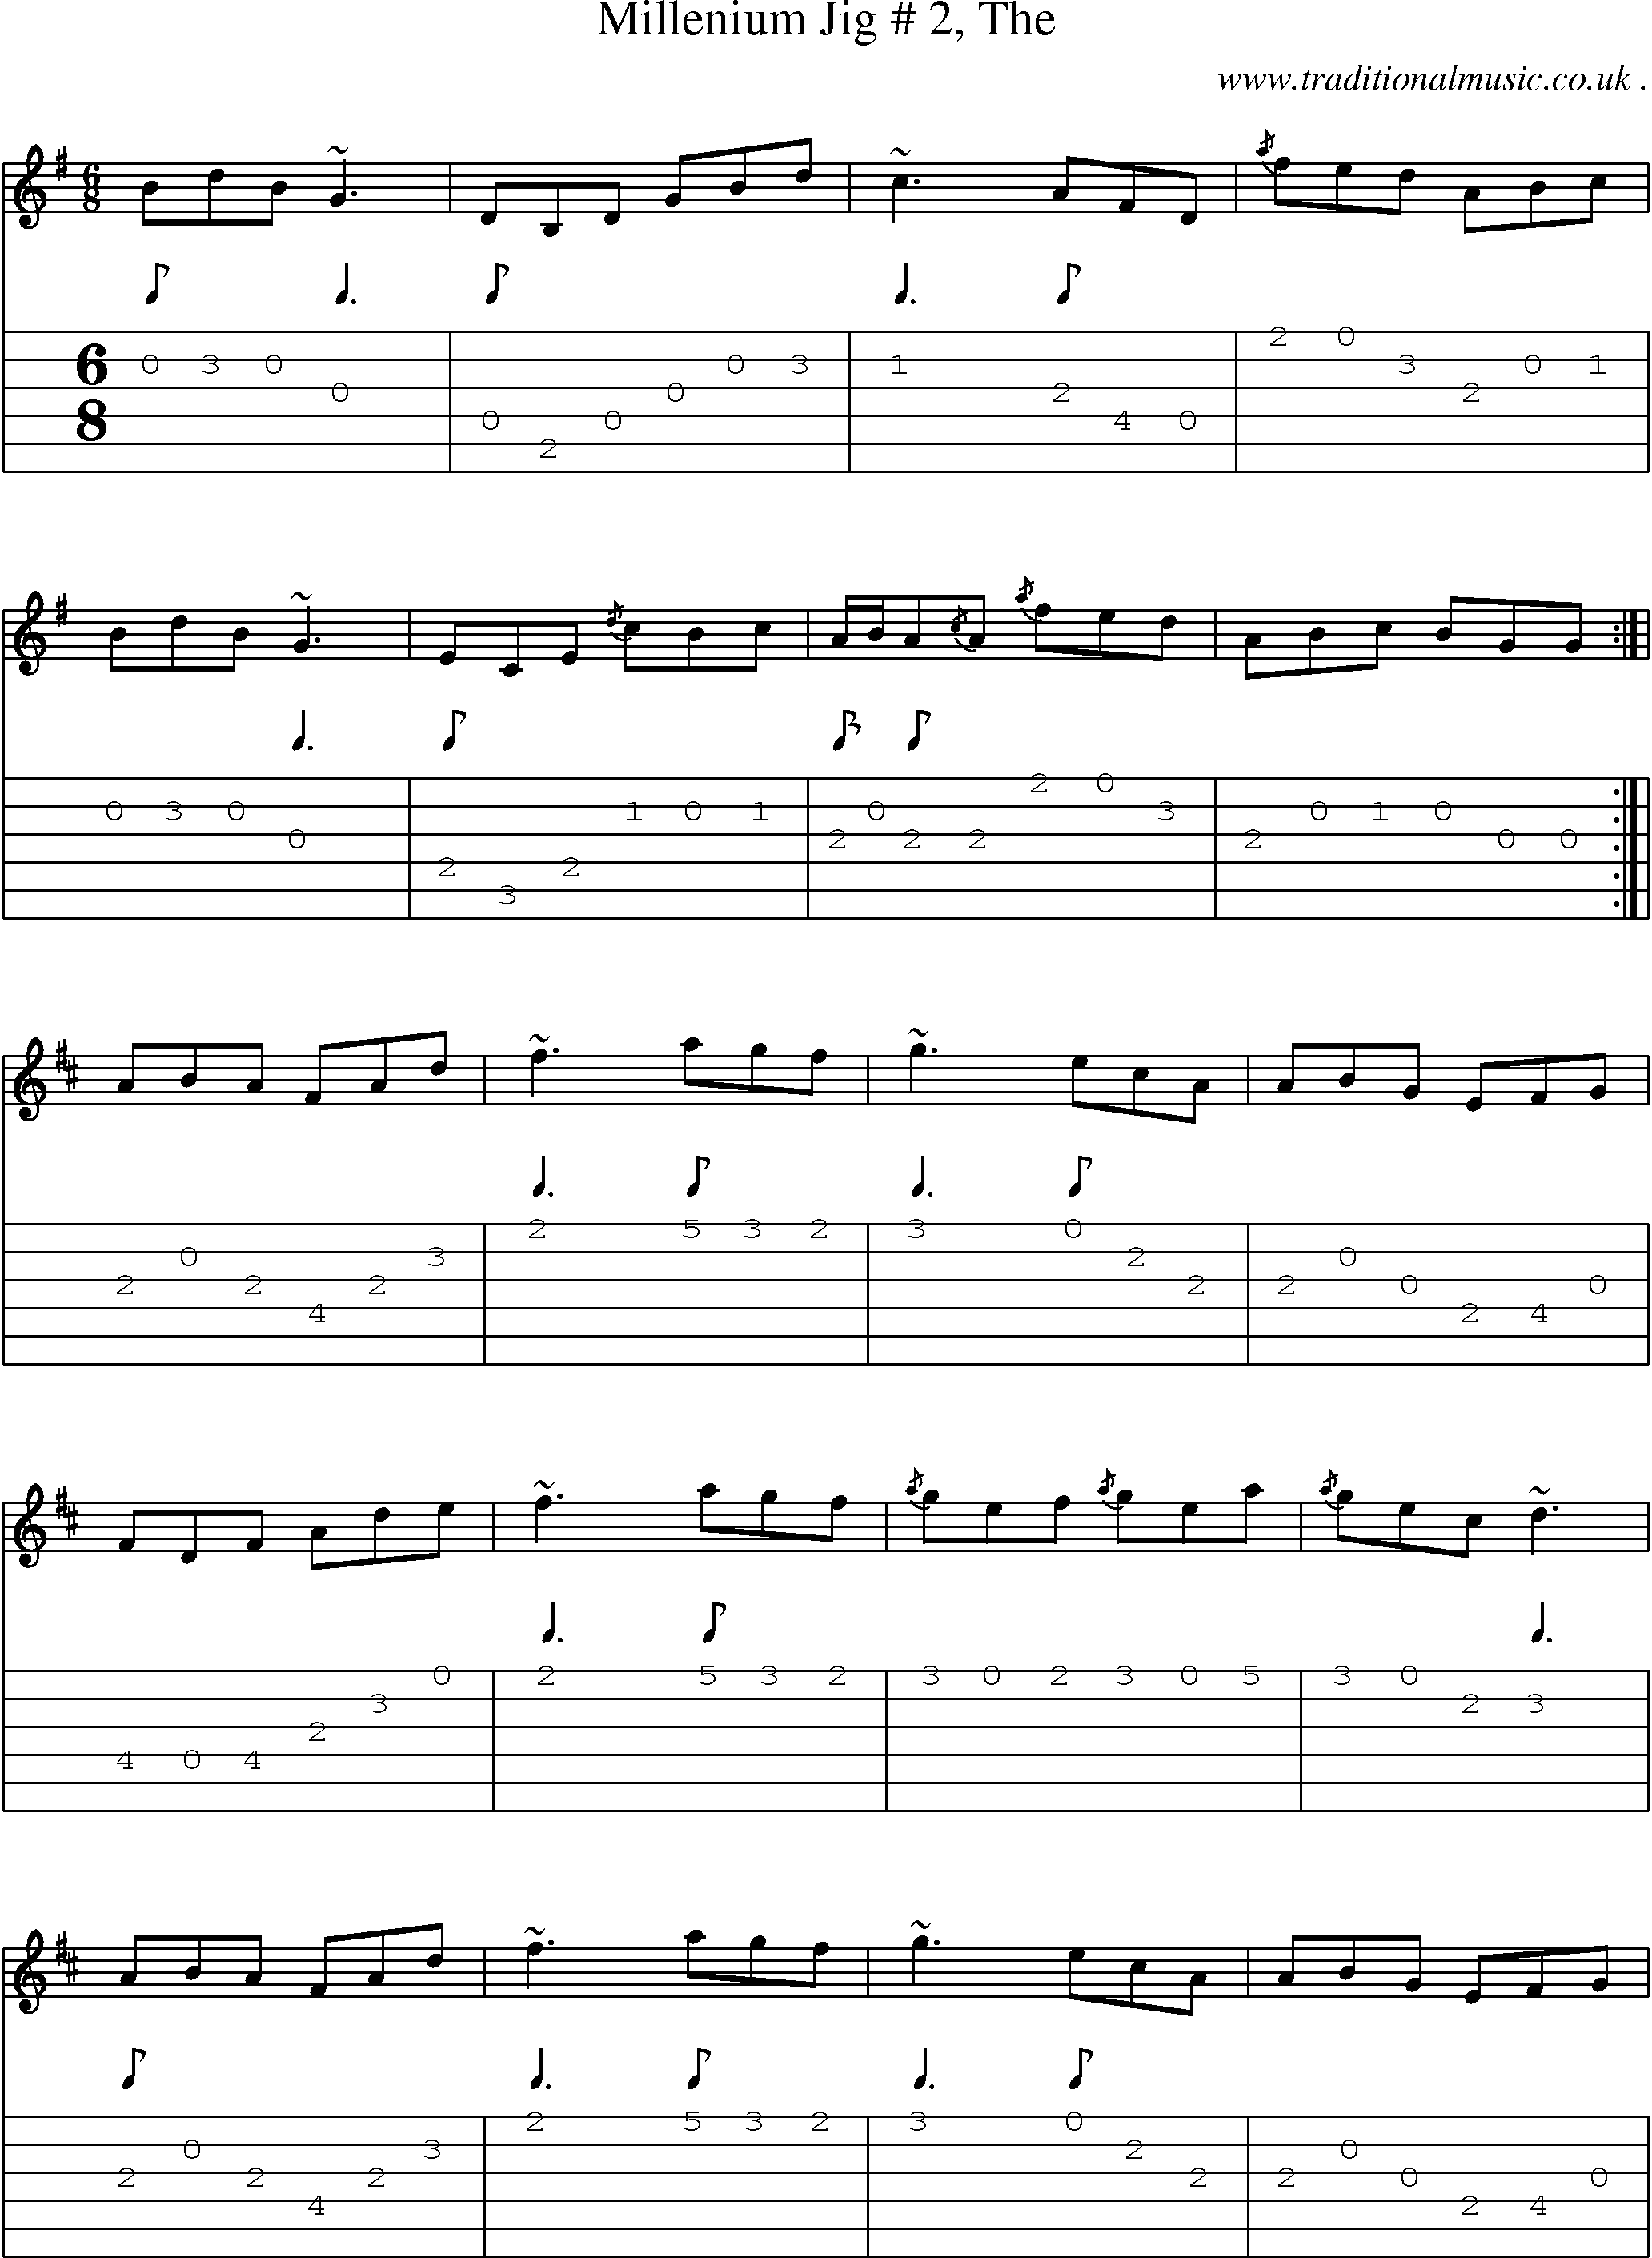 Sheet-music  score, Chords and Guitar Tabs for Millenium Jig  2 The